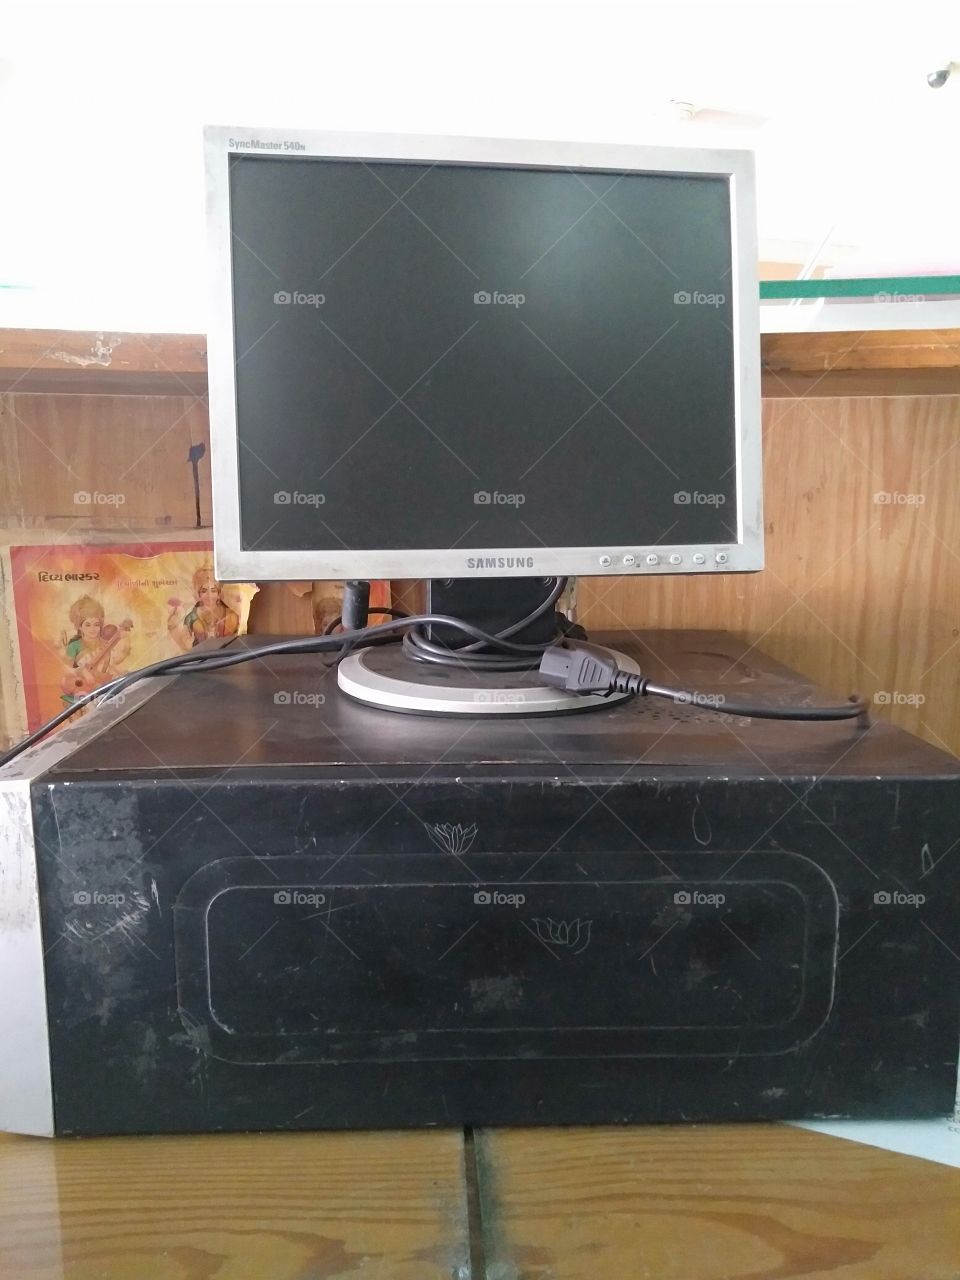 Old PC System